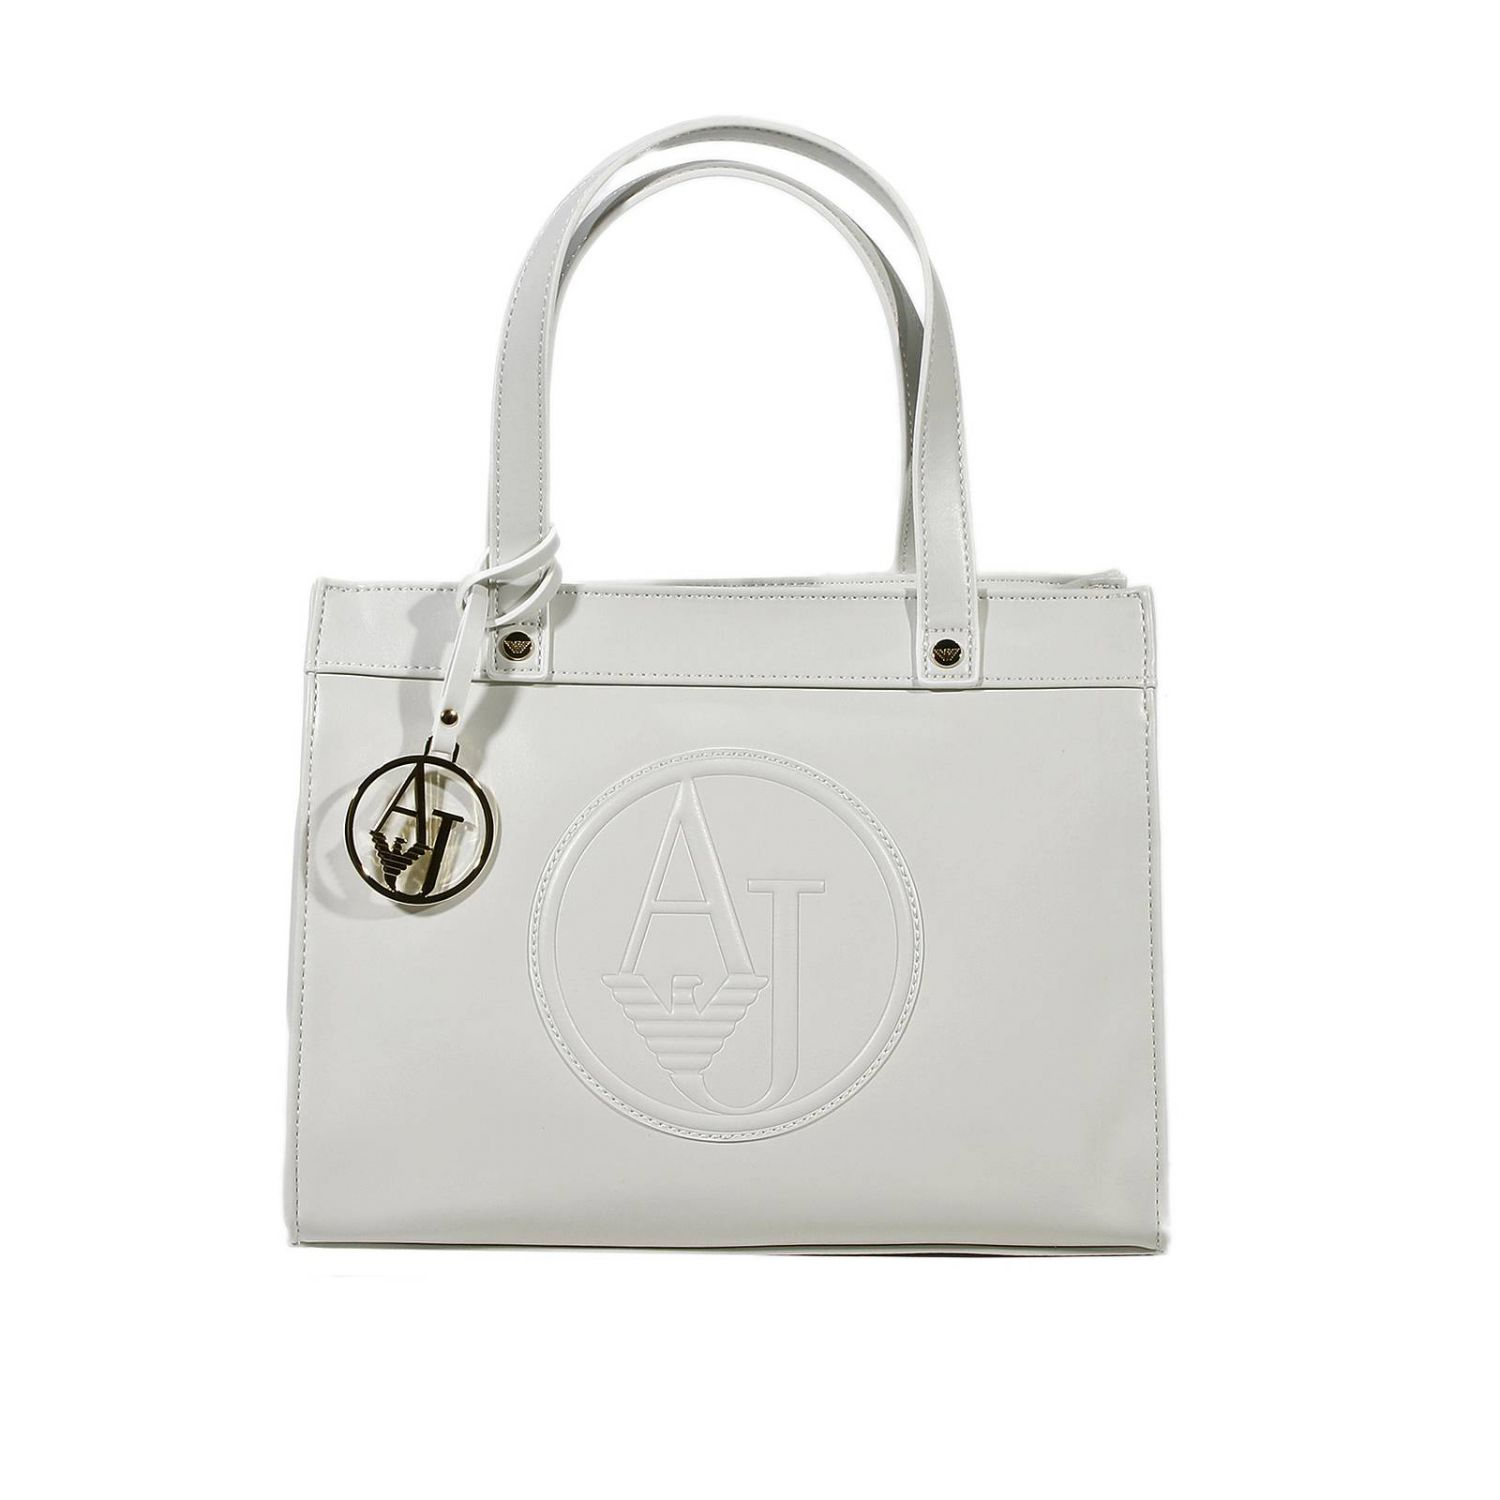 Armani Jeans Handbag Eco Leather Small Shopping Bag in White | Lyst